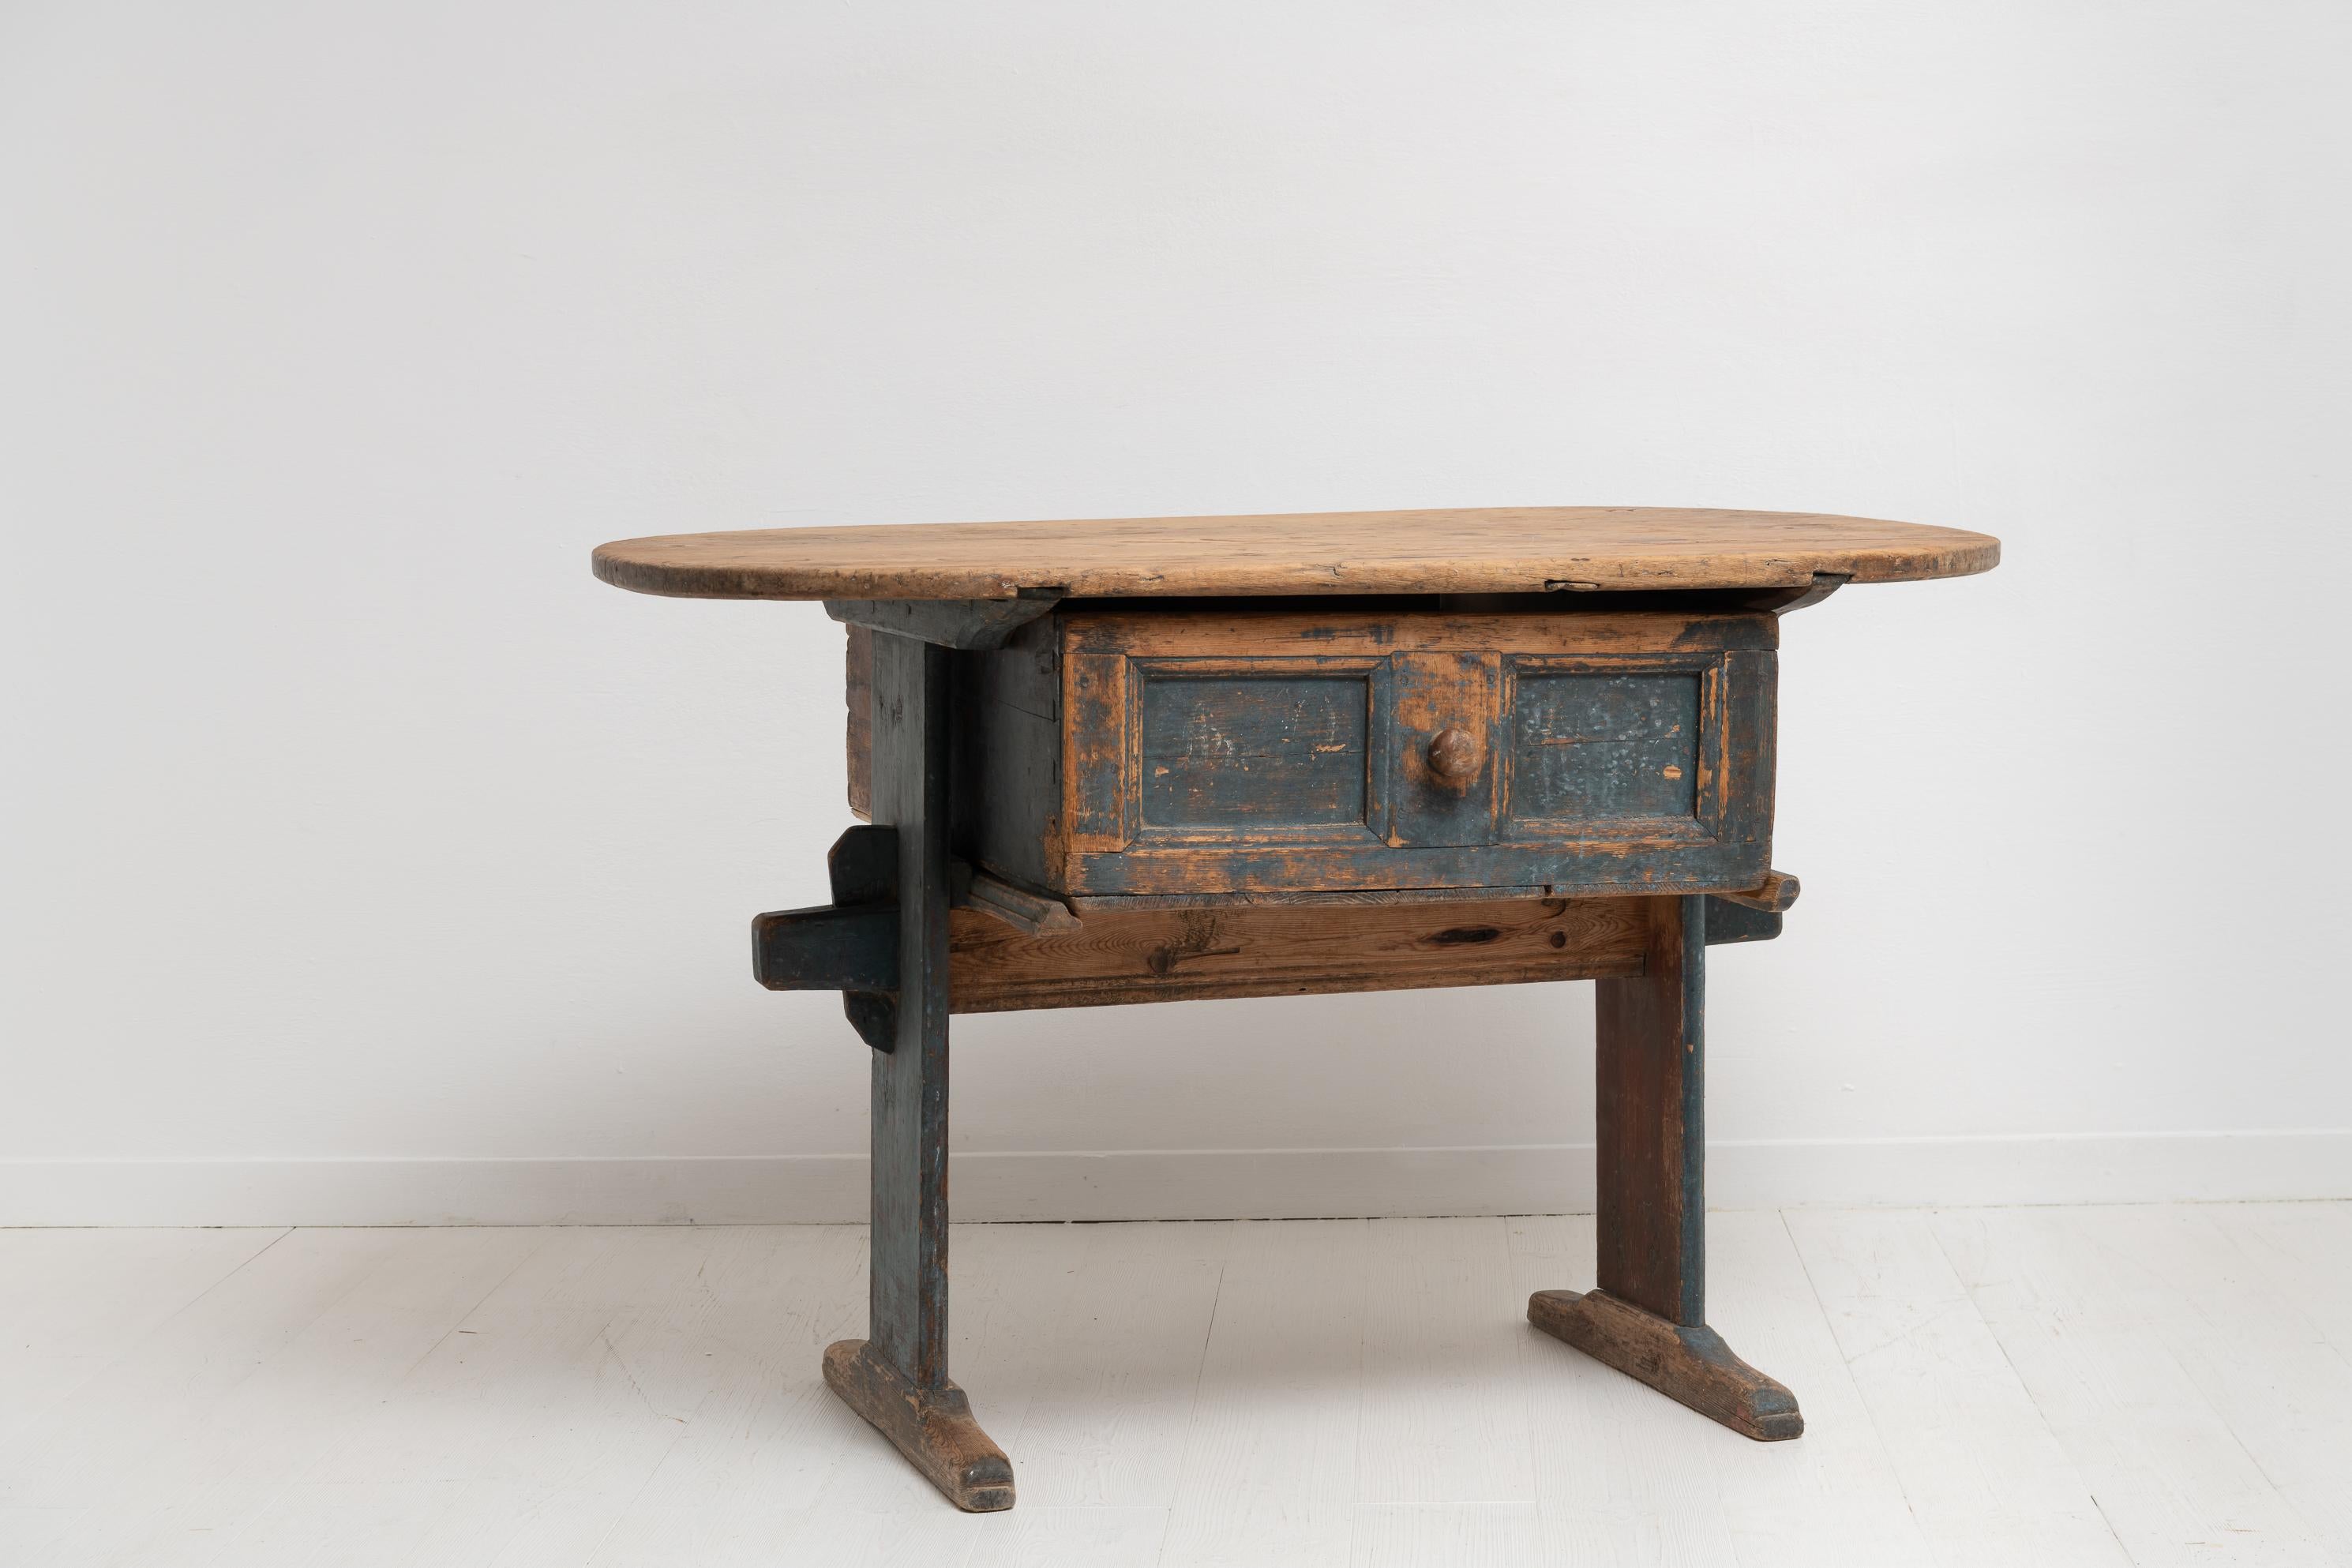 Folk Art country table from northern Sweden made in pine during the late 1700s. The charming table is an unusual country furniture in genuine untouched condition with original paint. Authentic wear after almost 250 years of use. Oval wood bare table